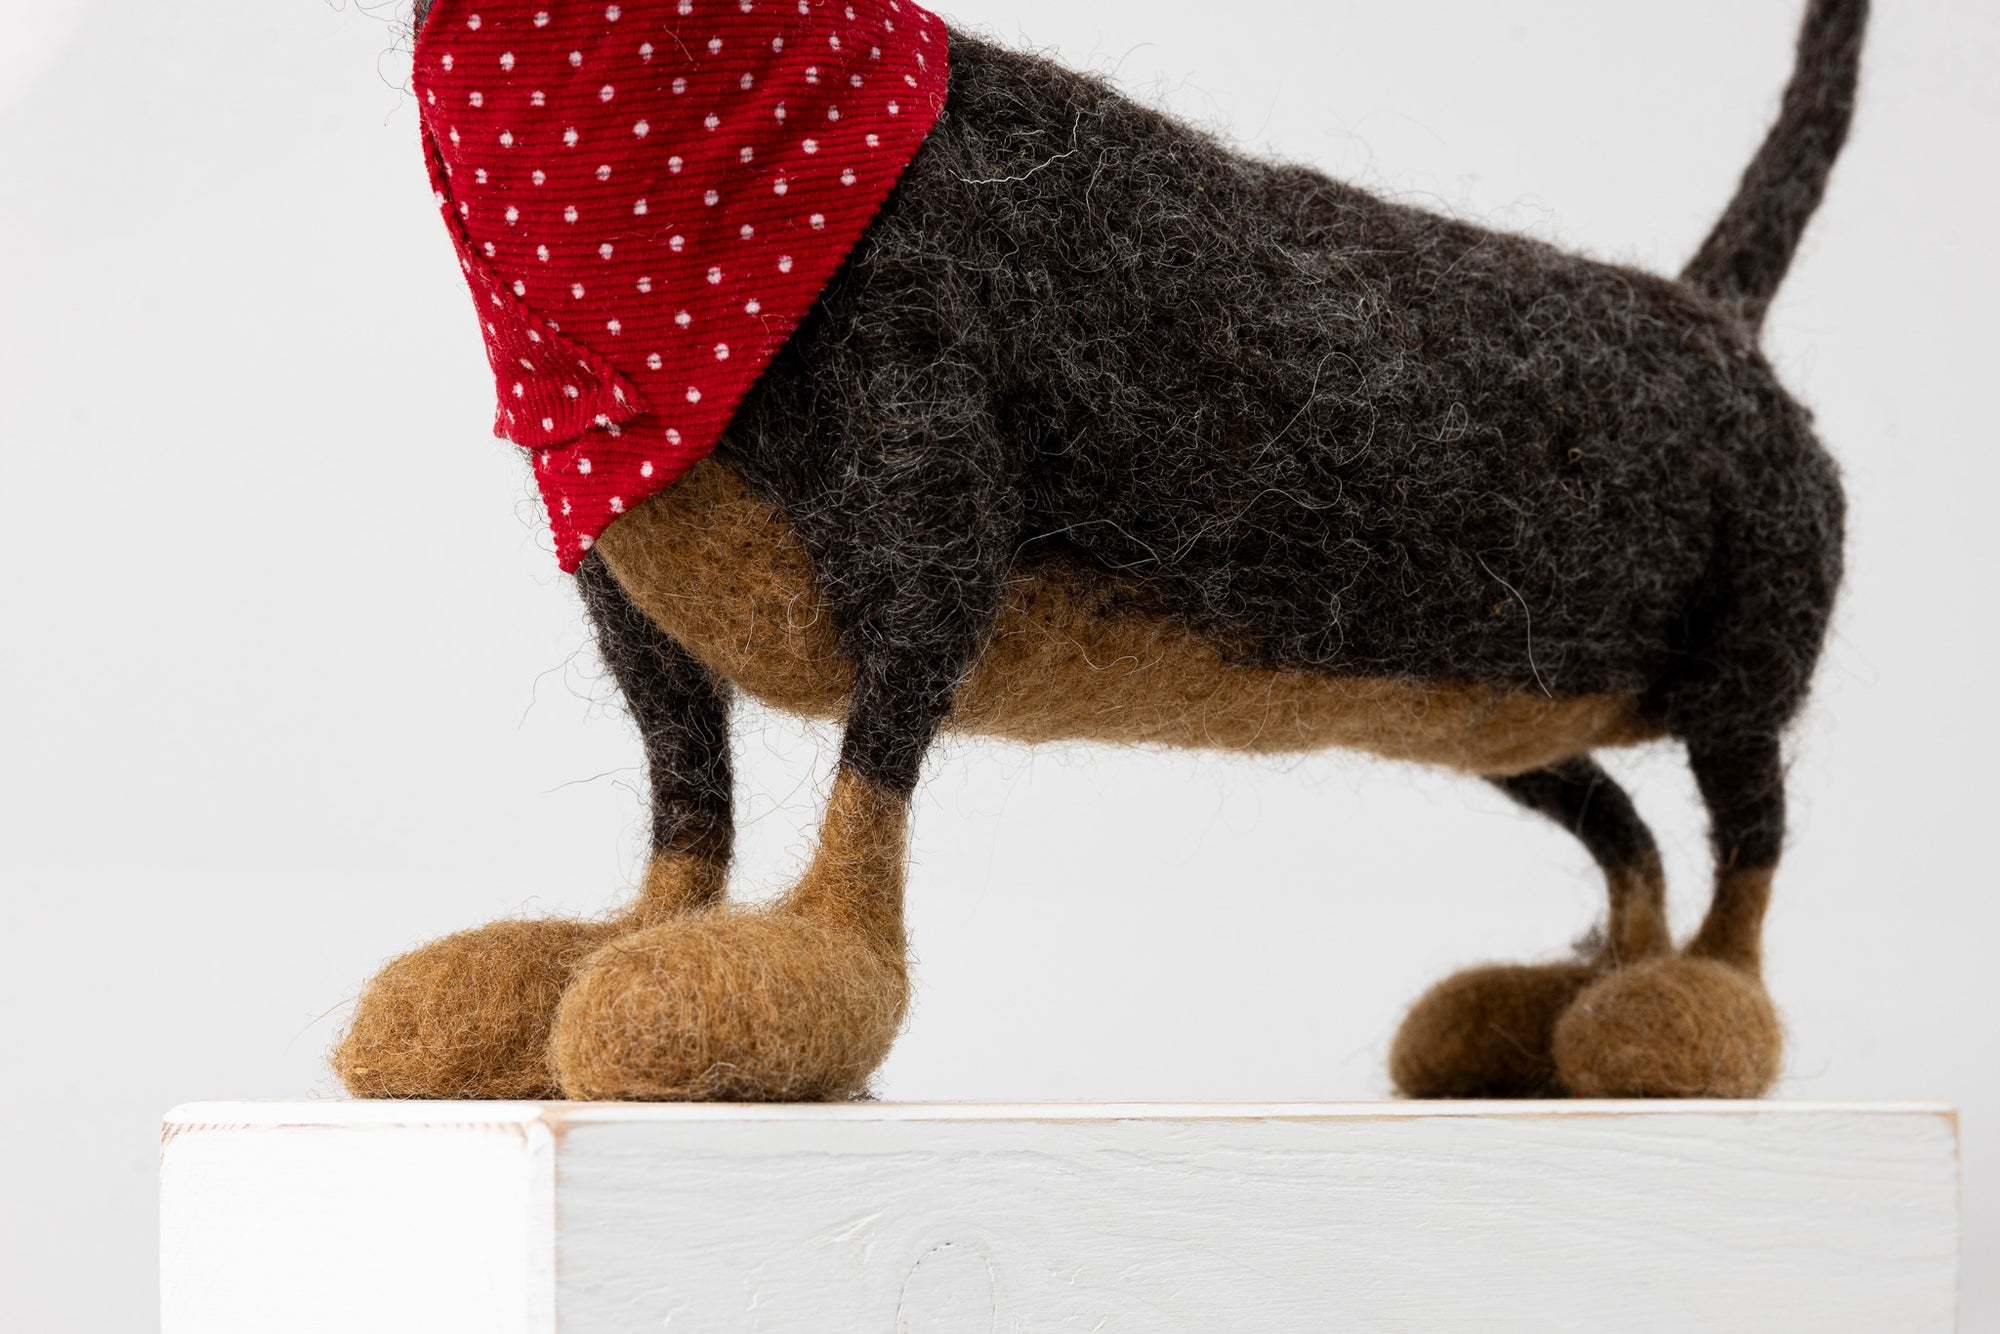 'Jackson' needlefelt character dog by Kate Toms, available at Padstow Gallery, Cornwall